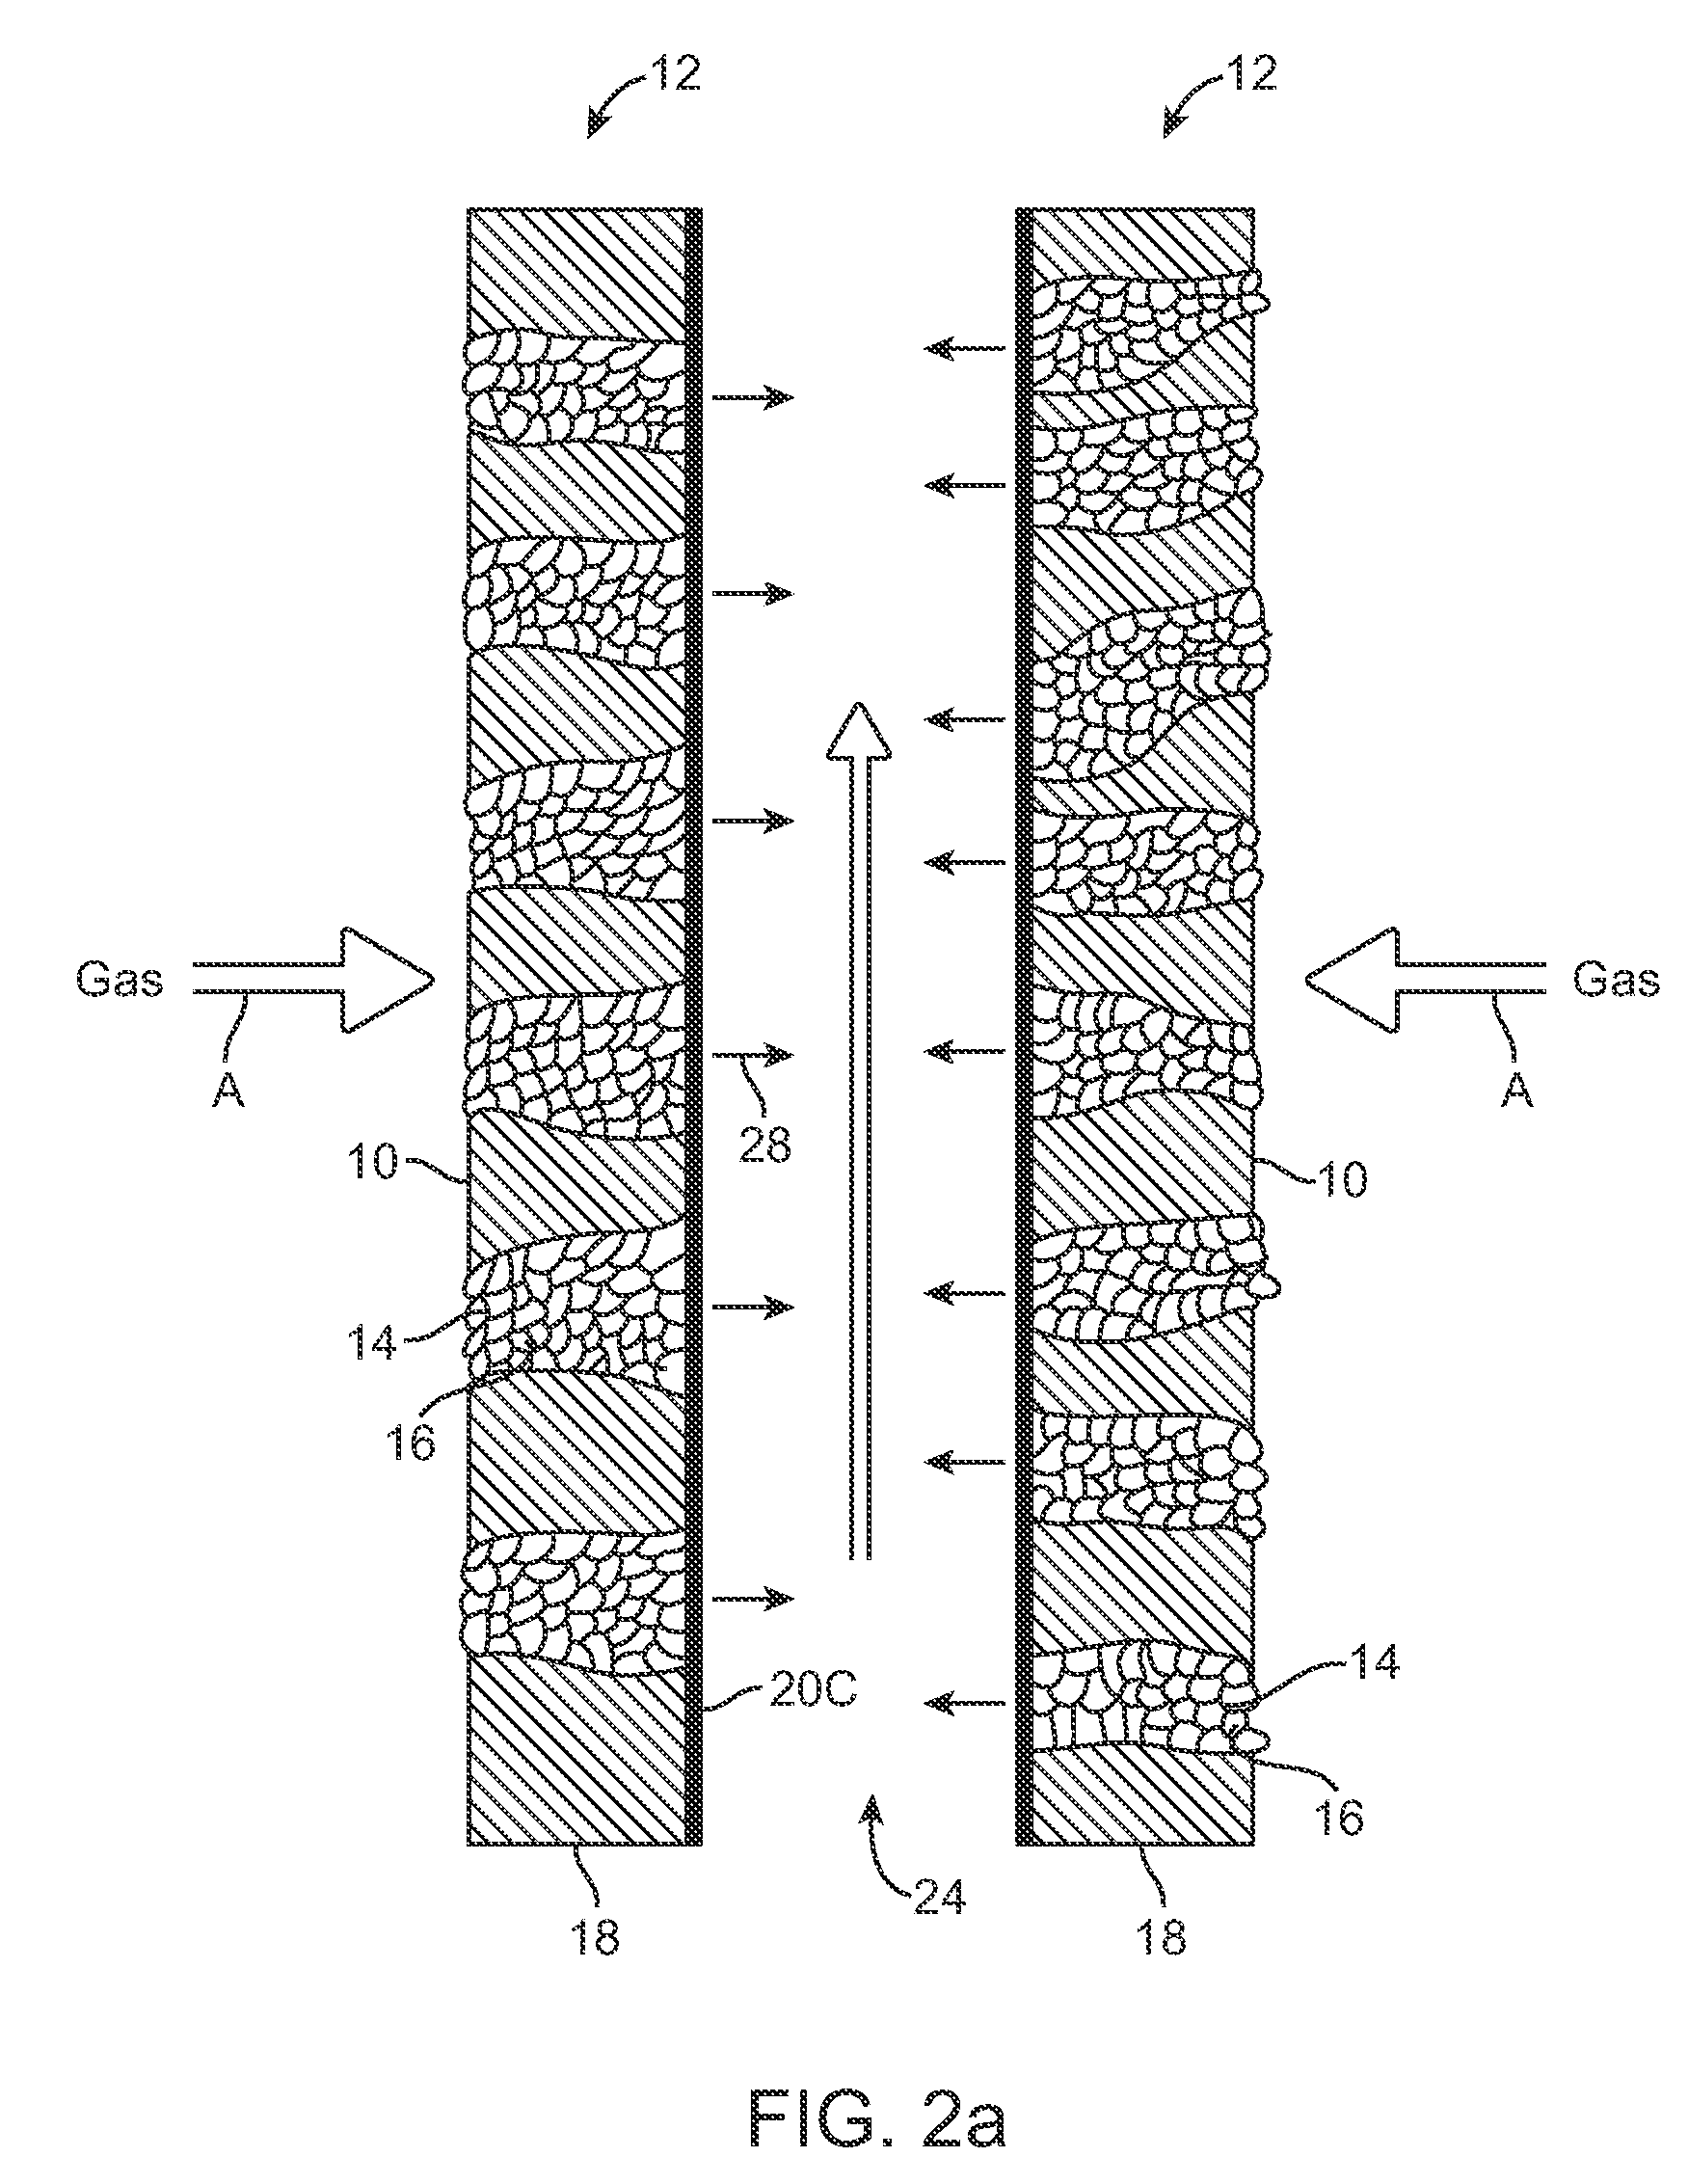 Syngas conversion system using asymmetric membrane and anaerobic microorganism